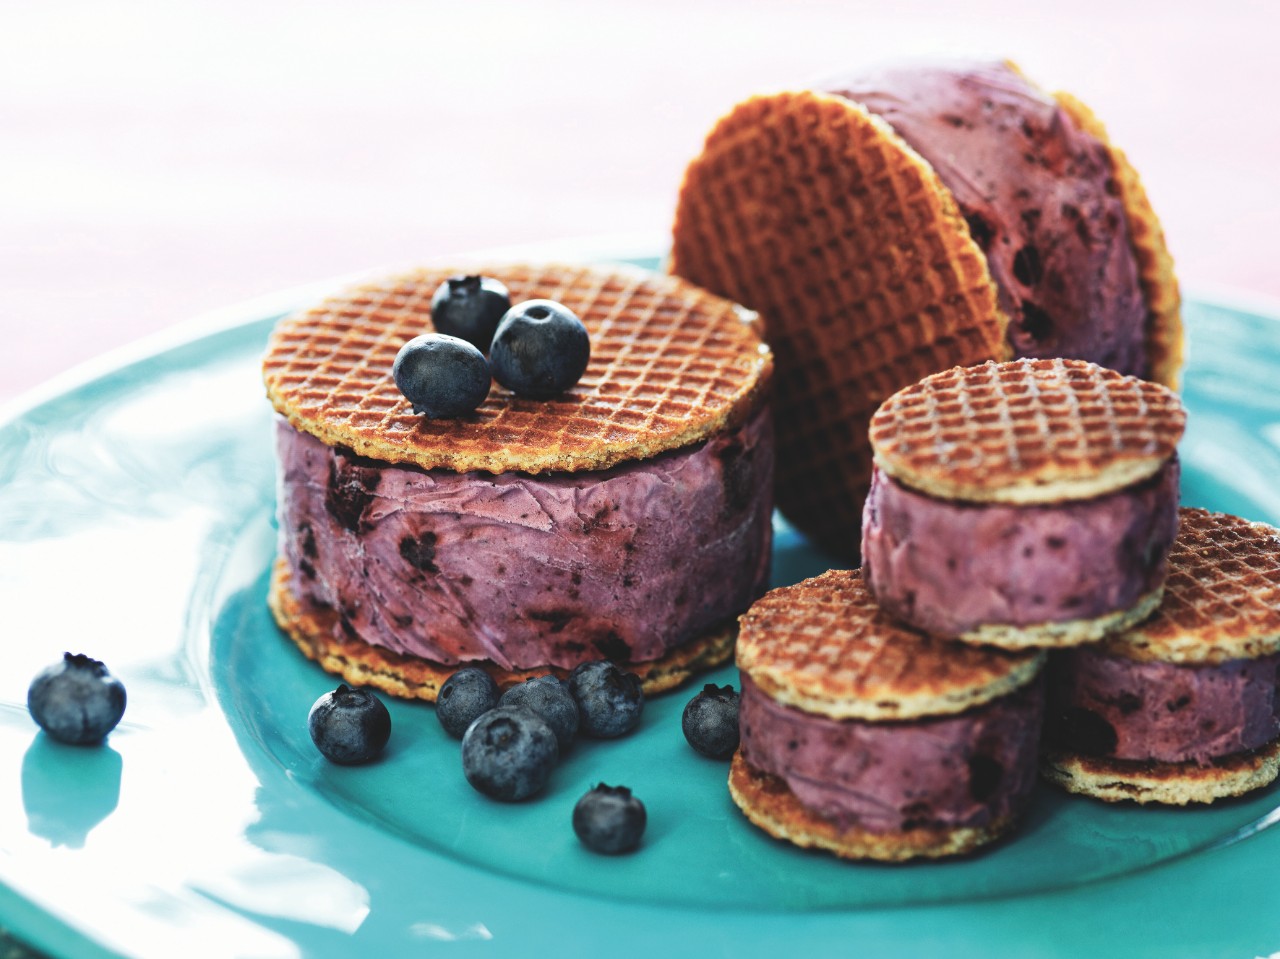 Blueberry ice cream sandwiches with caramel wafers